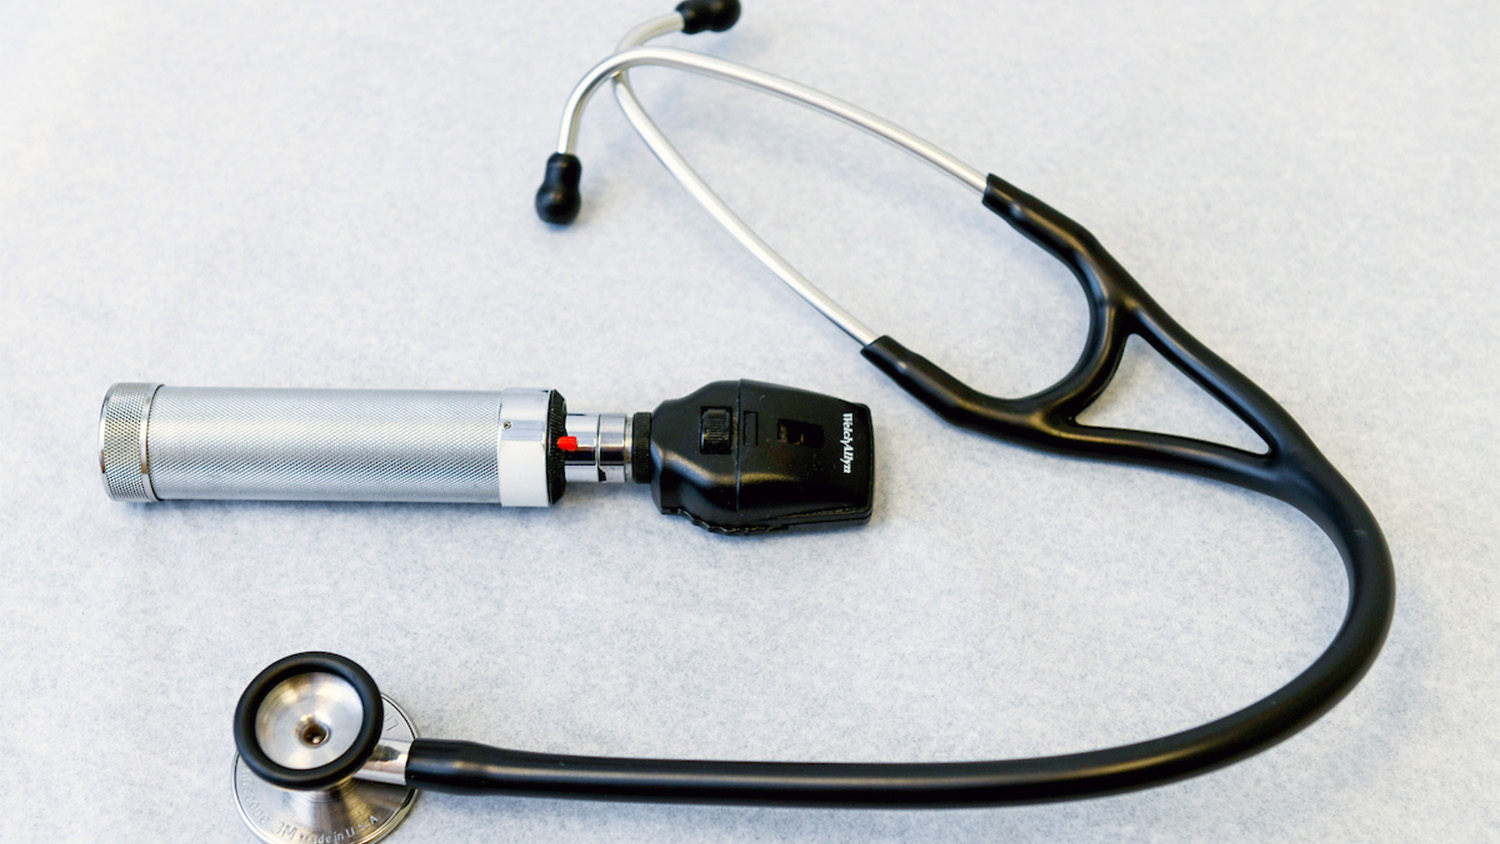 A stethoscope and thermometer on a white table